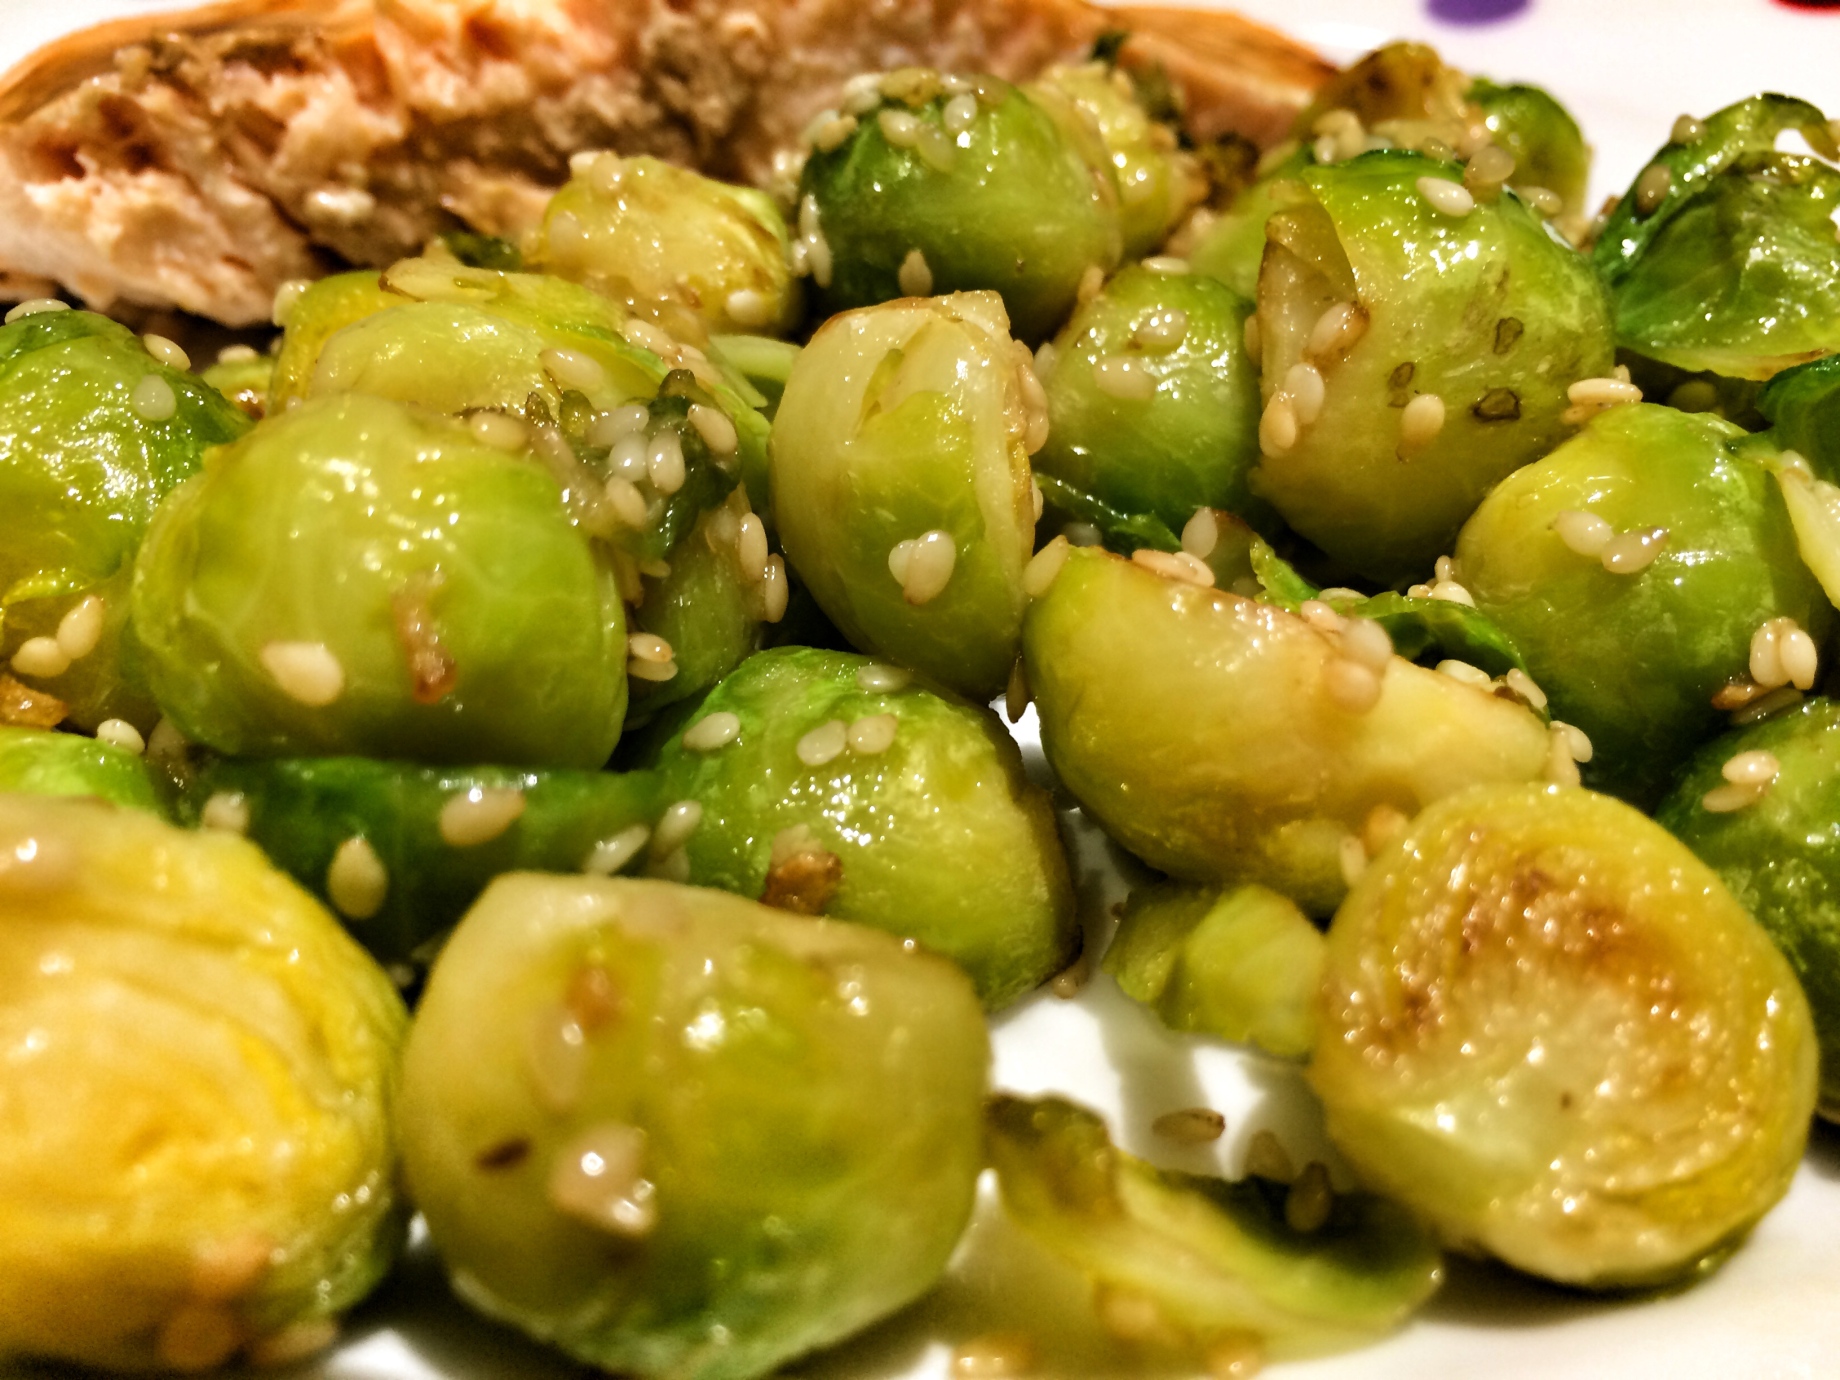 Sprouts are for winter not just for Christmas